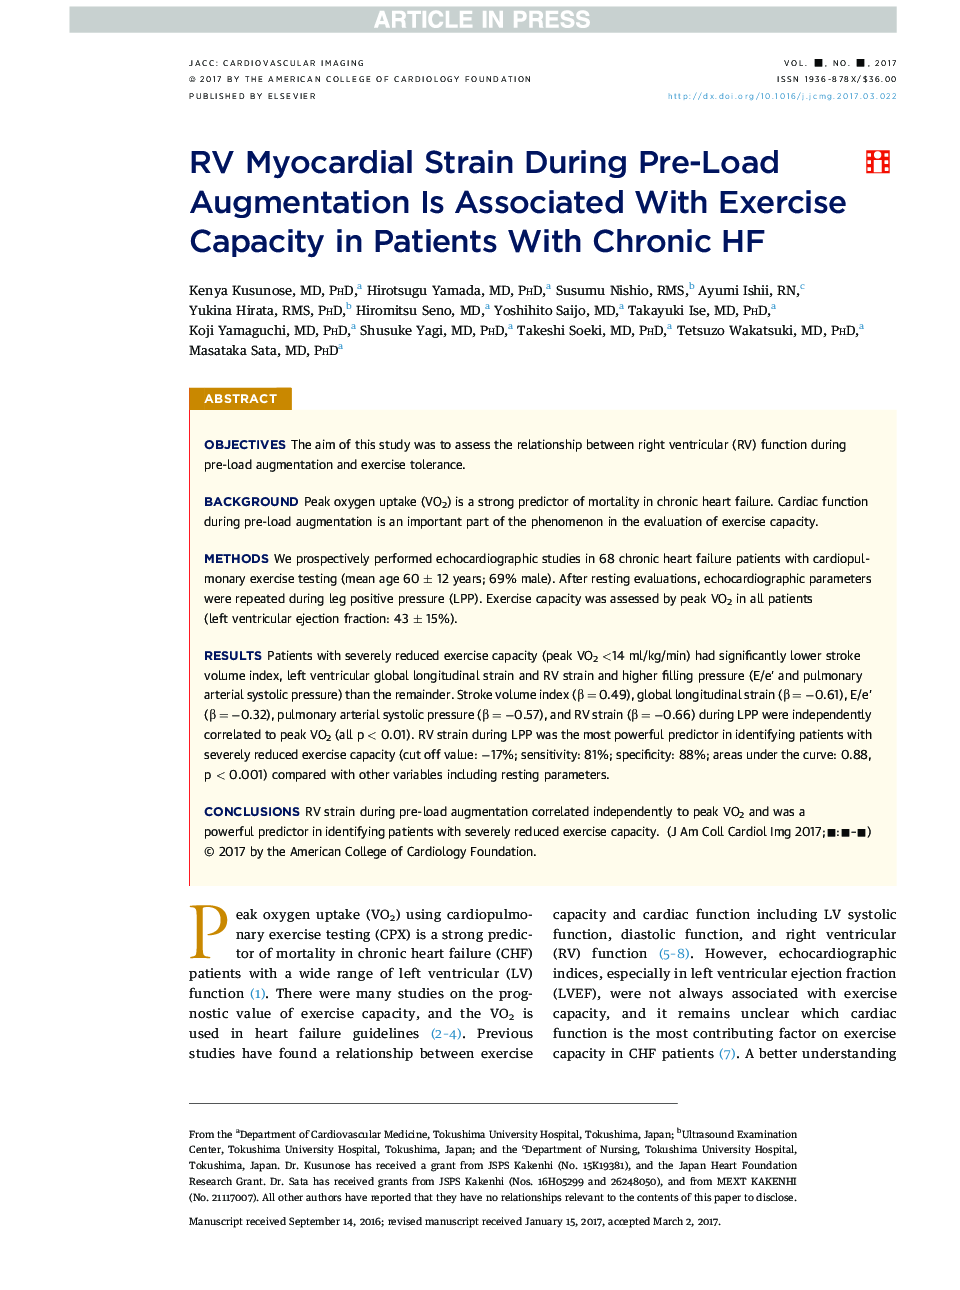 RV Myocardial Strain During Pre-Load Augmentation Is Associated With Exercise Capacity in Patients With Chronic HF